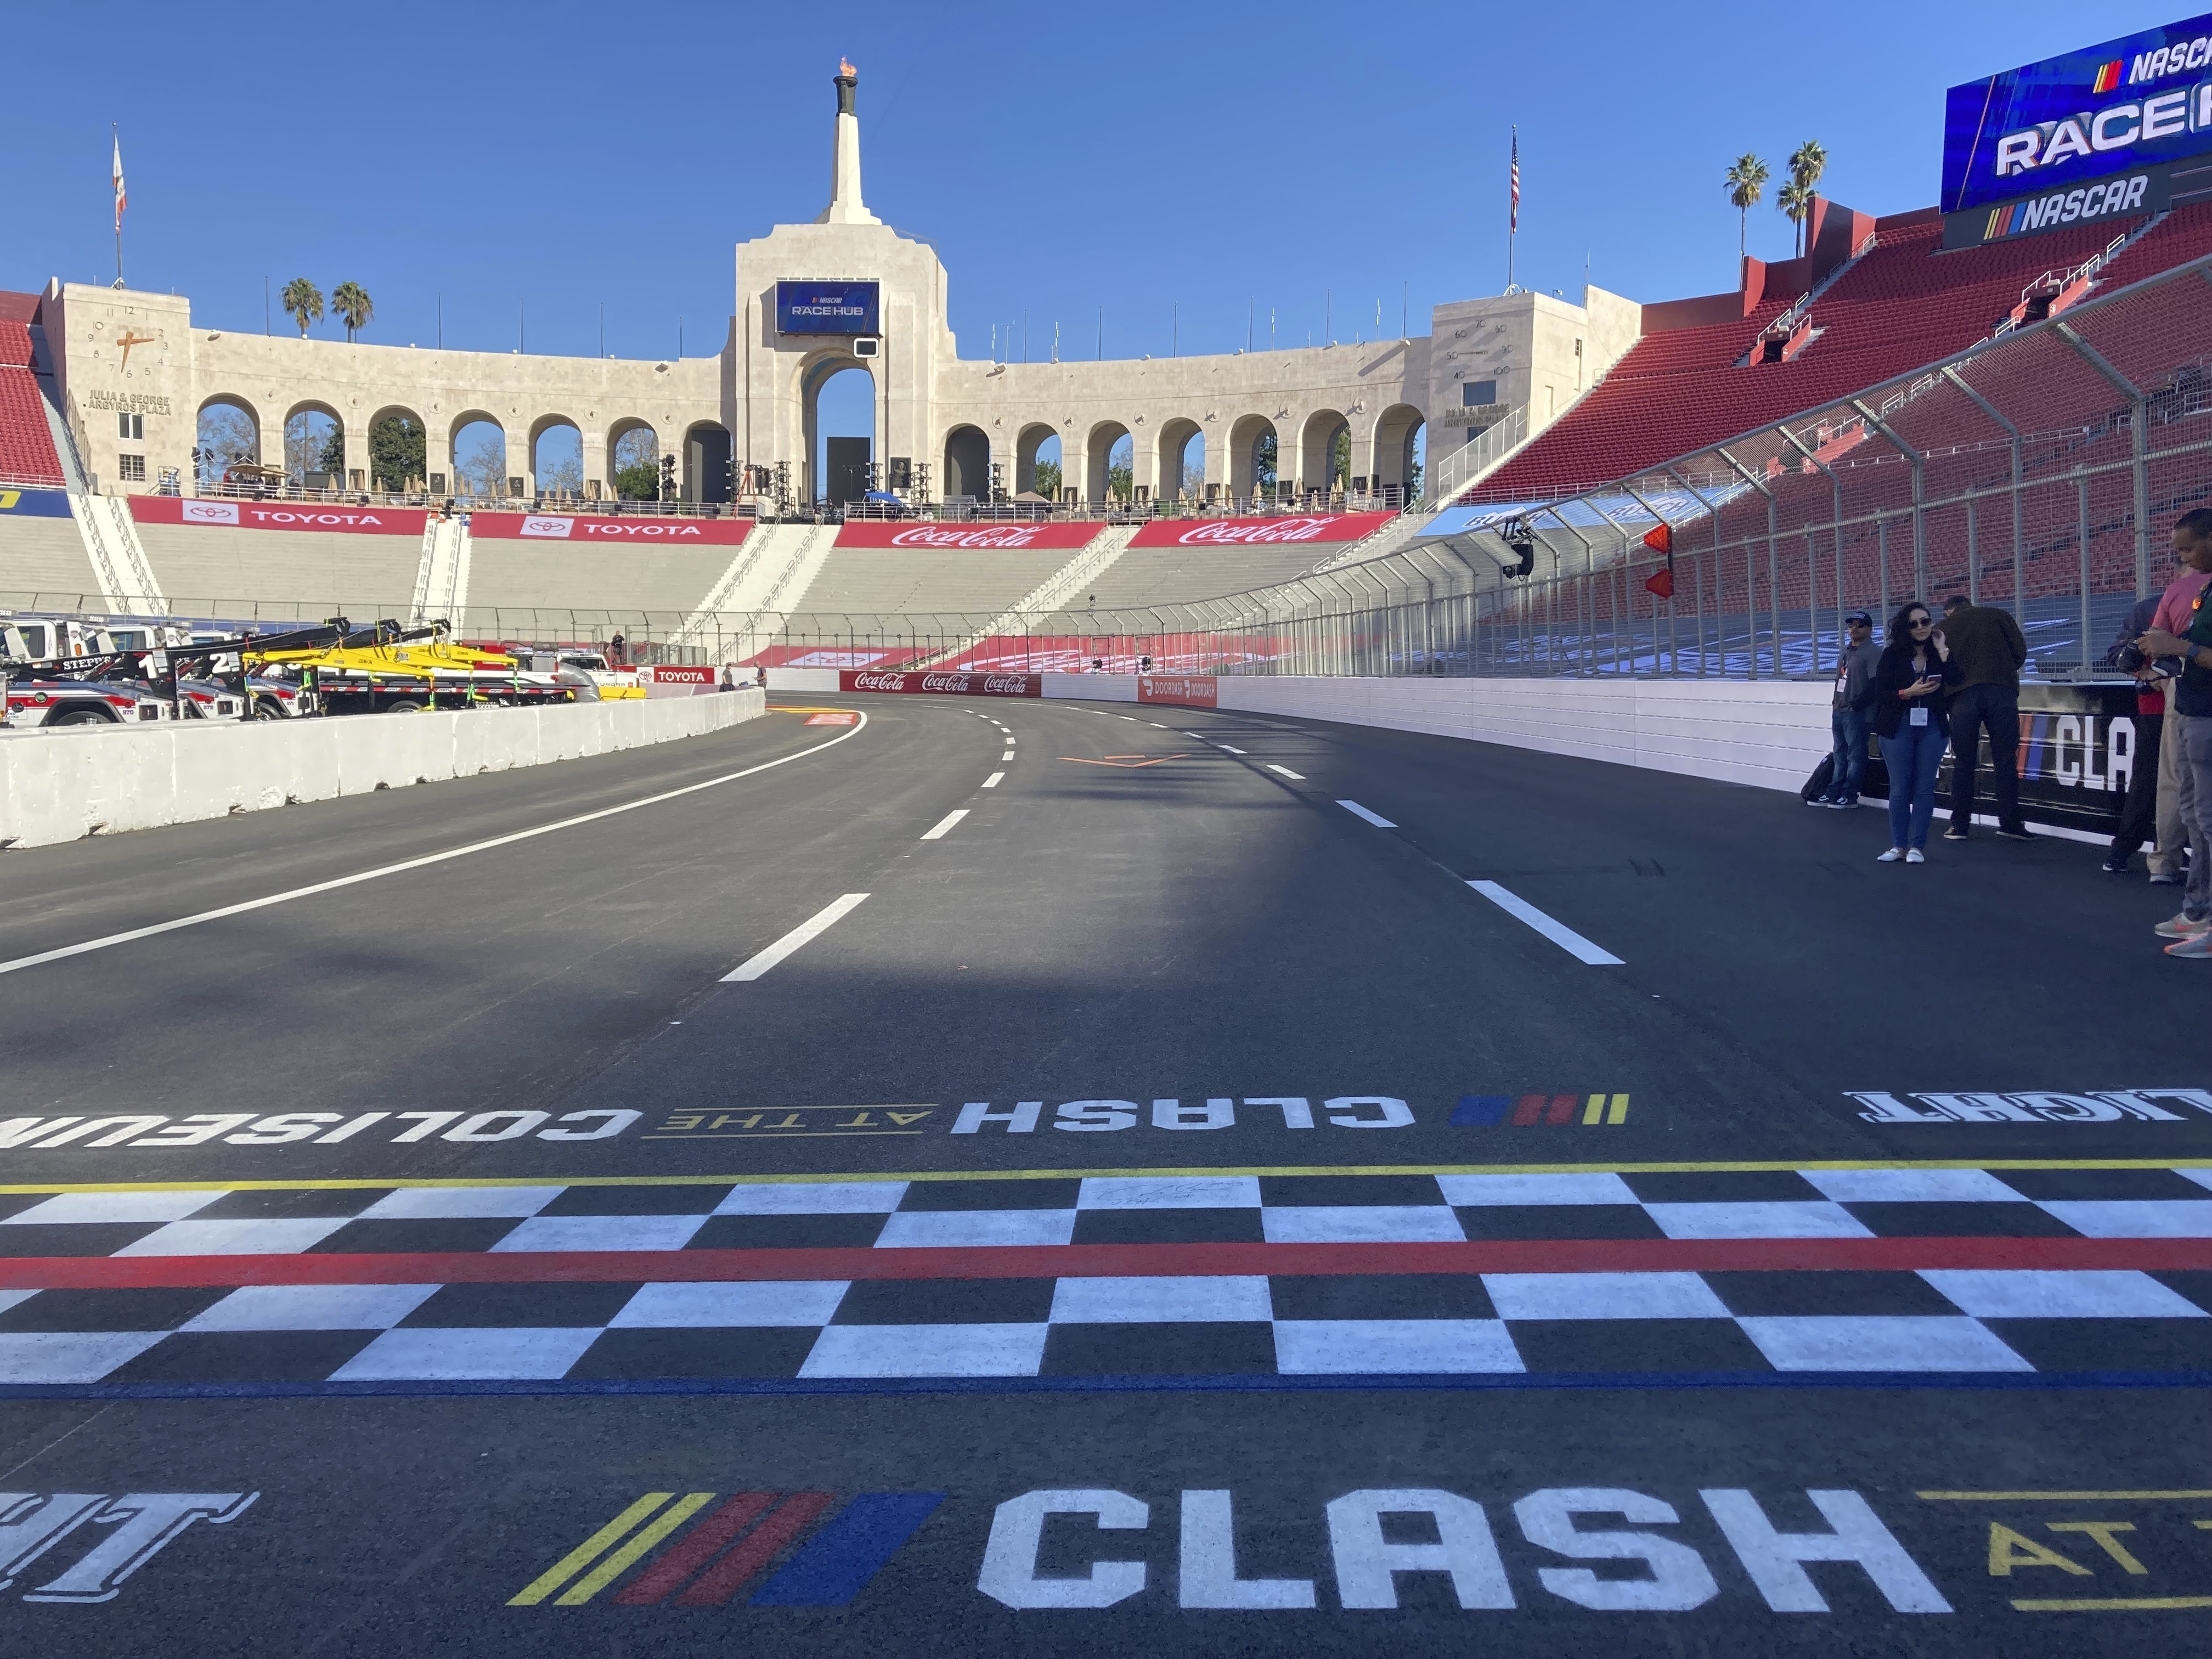 NASCAR bet more than $1 million to bring cars into Los Angeles Coliseum